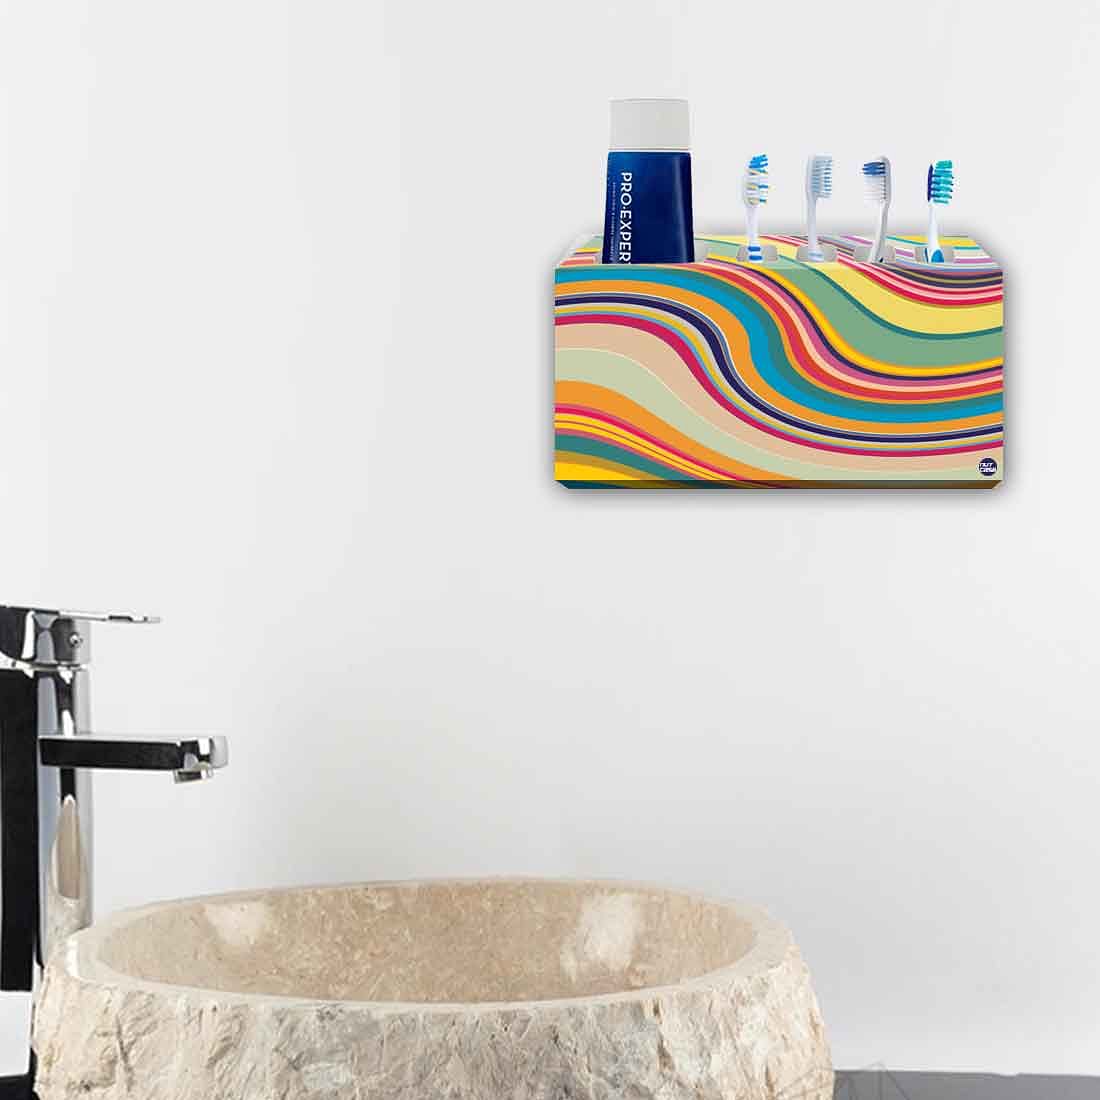 Toothbrush Holder Wall Mounted -Coloreful Waves Lines Nutcase